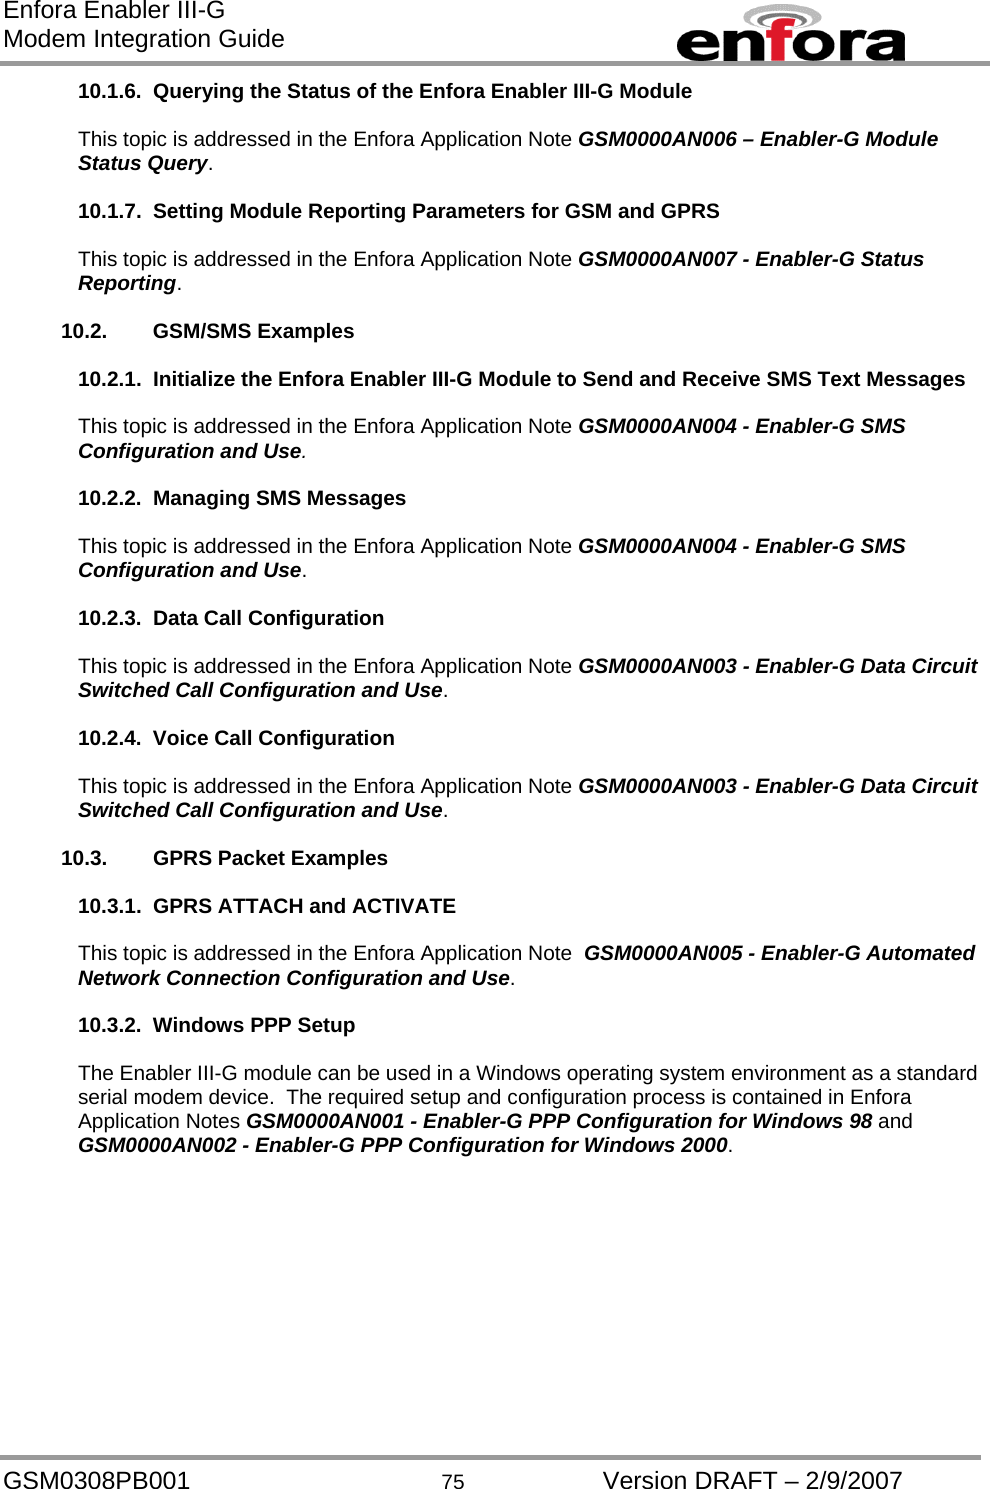 Enfora Enabler III-G Modem Integration Guide 10.1.6.  Querying the Status of the Enfora Enabler III-G Module  This topic is addressed in the Enfora Application Note GSM0000AN006 – Enabler-G Module Status Query.  10.1.7.  Setting Module Reporting Parameters for GSM and GPRS  This topic is addressed in the Enfora Application Note GSM0000AN007 - Enabler-G Status Reporting.  10.2. GSM/SMS Examples  10.2.1.  Initialize the Enfora Enabler III-G Module to Send and Receive SMS Text Messages  This topic is addressed in the Enfora Application Note GSM0000AN004 - Enabler-G SMS Configuration and Use.  10.2.2.  Managing SMS Messages  This topic is addressed in the Enfora Application Note GSM0000AN004 - Enabler-G SMS Configuration and Use.  10.2.3.  Data Call Configuration  This topic is addressed in the Enfora Application Note GSM0000AN003 - Enabler-G Data Circuit Switched Call Configuration and Use.  10.2.4.  Voice Call Configuration  This topic is addressed in the Enfora Application Note GSM0000AN003 - Enabler-G Data Circuit Switched Call Configuration and Use.  10.3.  GPRS Packet Examples  10.3.1.  GPRS ATTACH and ACTIVATE  This topic is addressed in the Enfora Application Note  GSM0000AN005 - Enabler-G Automated Network Connection Configuration and Use.  10.3.2.  Windows PPP Setup  The Enabler III-G module can be used in a Windows operating system environment as a standard serial modem device.  The required setup and configuration process is contained in Enfora Application Notes GSM0000AN001 - Enabler-G PPP Configuration for Windows 98 and GSM0000AN002 - Enabler-G PPP Configuration for Windows 2000.   GSM0308PB001  75  Version DRAFT – 2/9/2007 